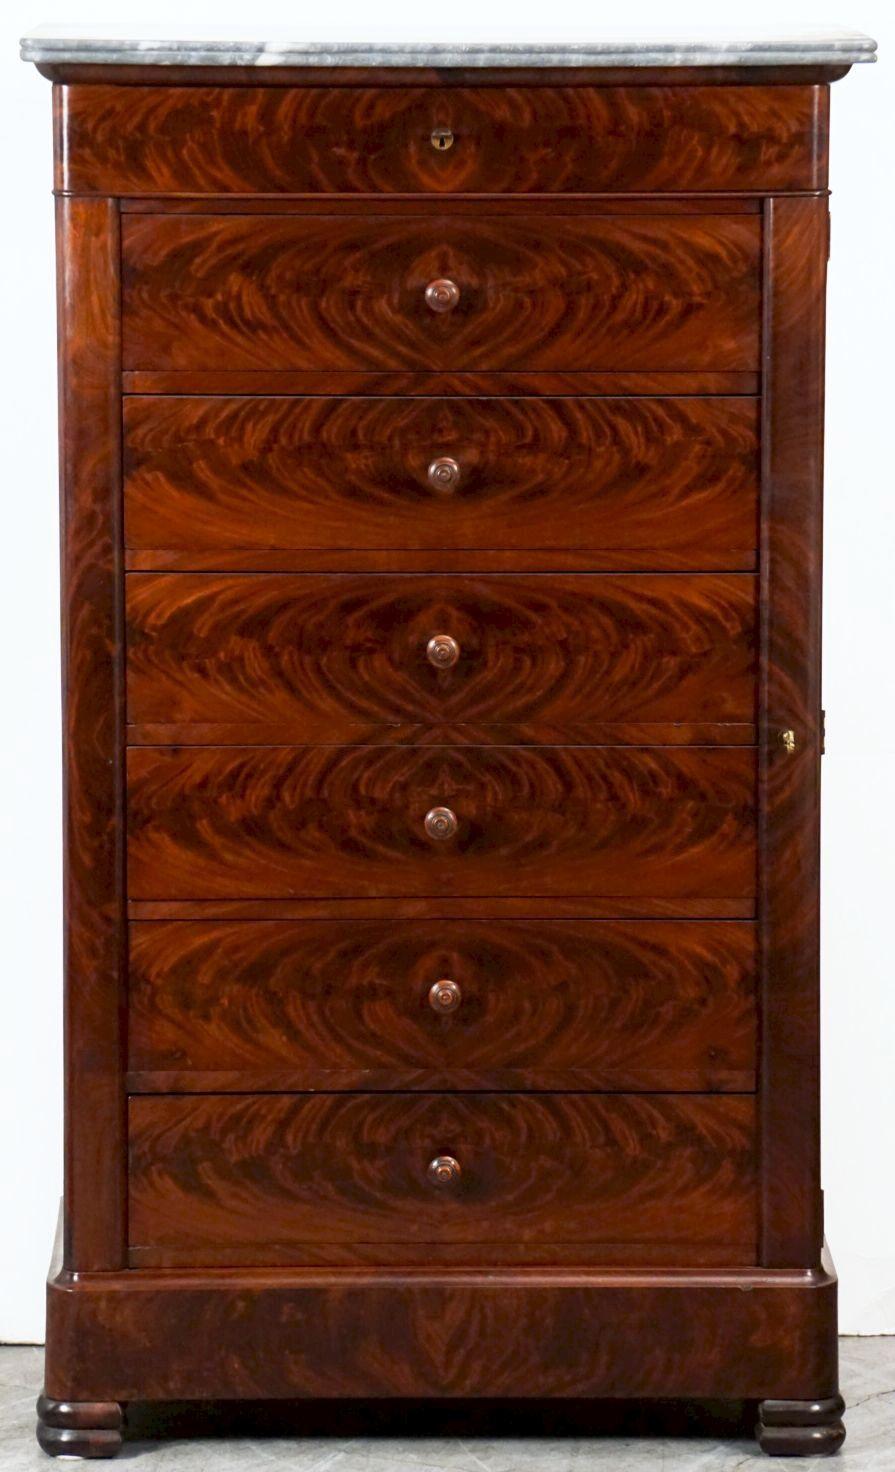 A fine French semainier or tall chest of mahogany, featuring a figured marble top over a frieze of one drawer with escutcheon over six drawers with a locking pilaster and key - each drawer showing matching flame-cut veneers and having knob pulls.